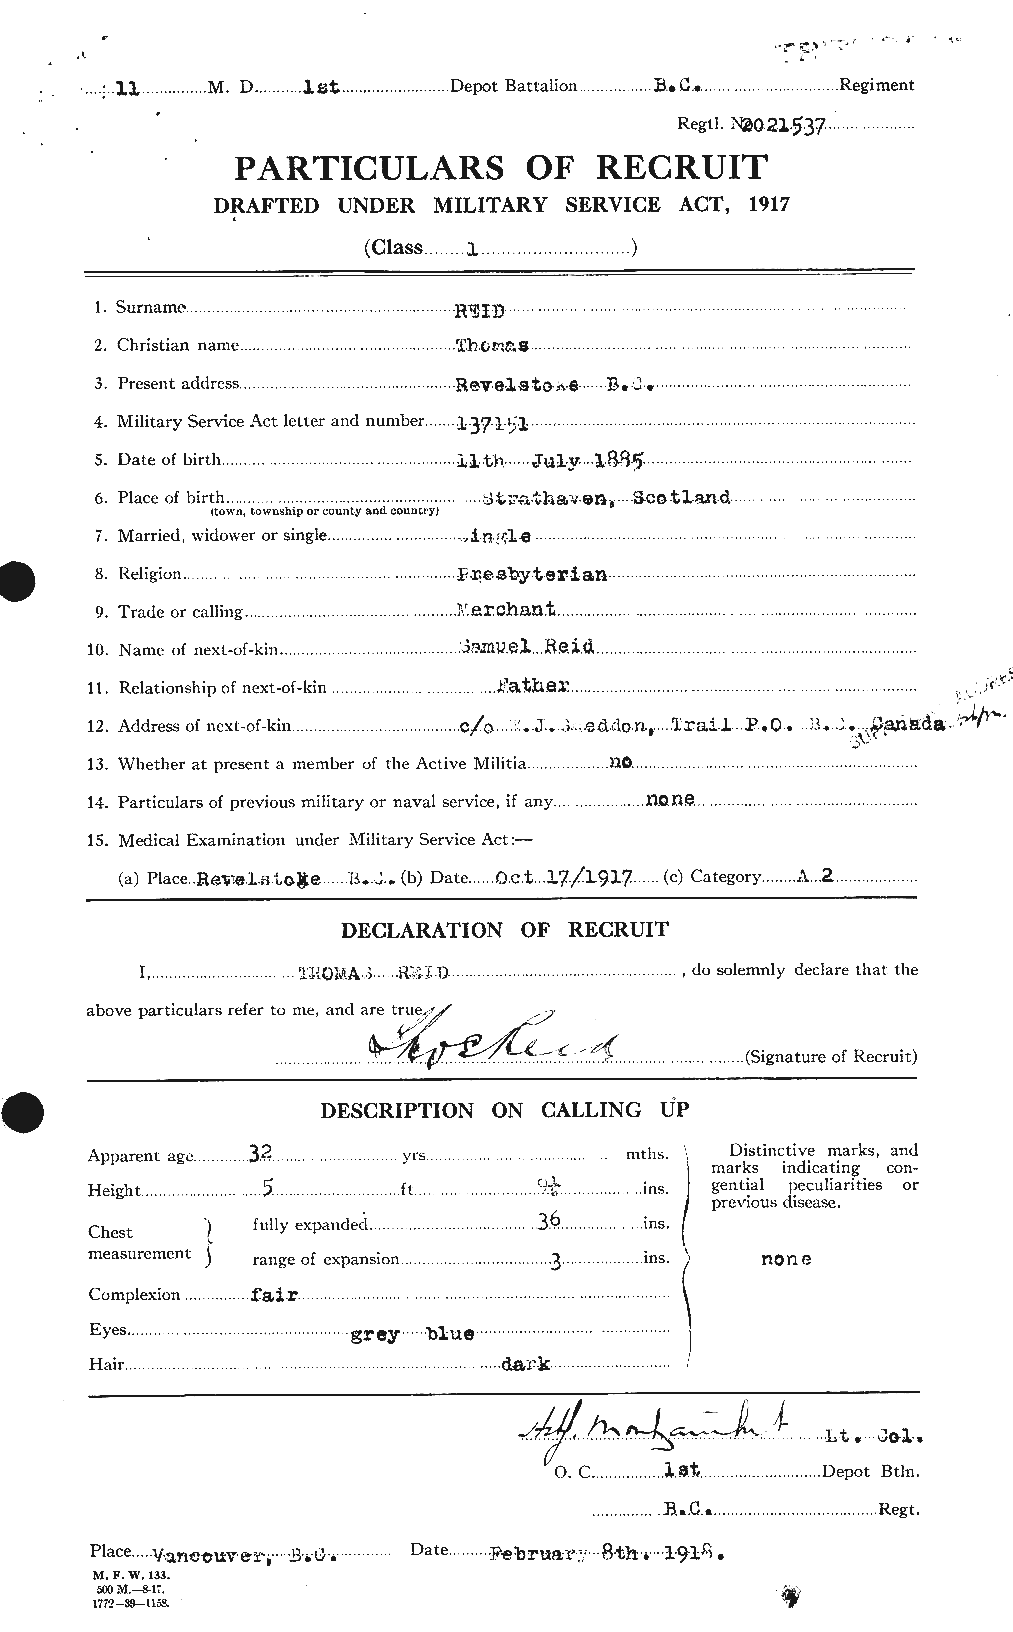 Personnel Records of the First World War - CEF 601989a